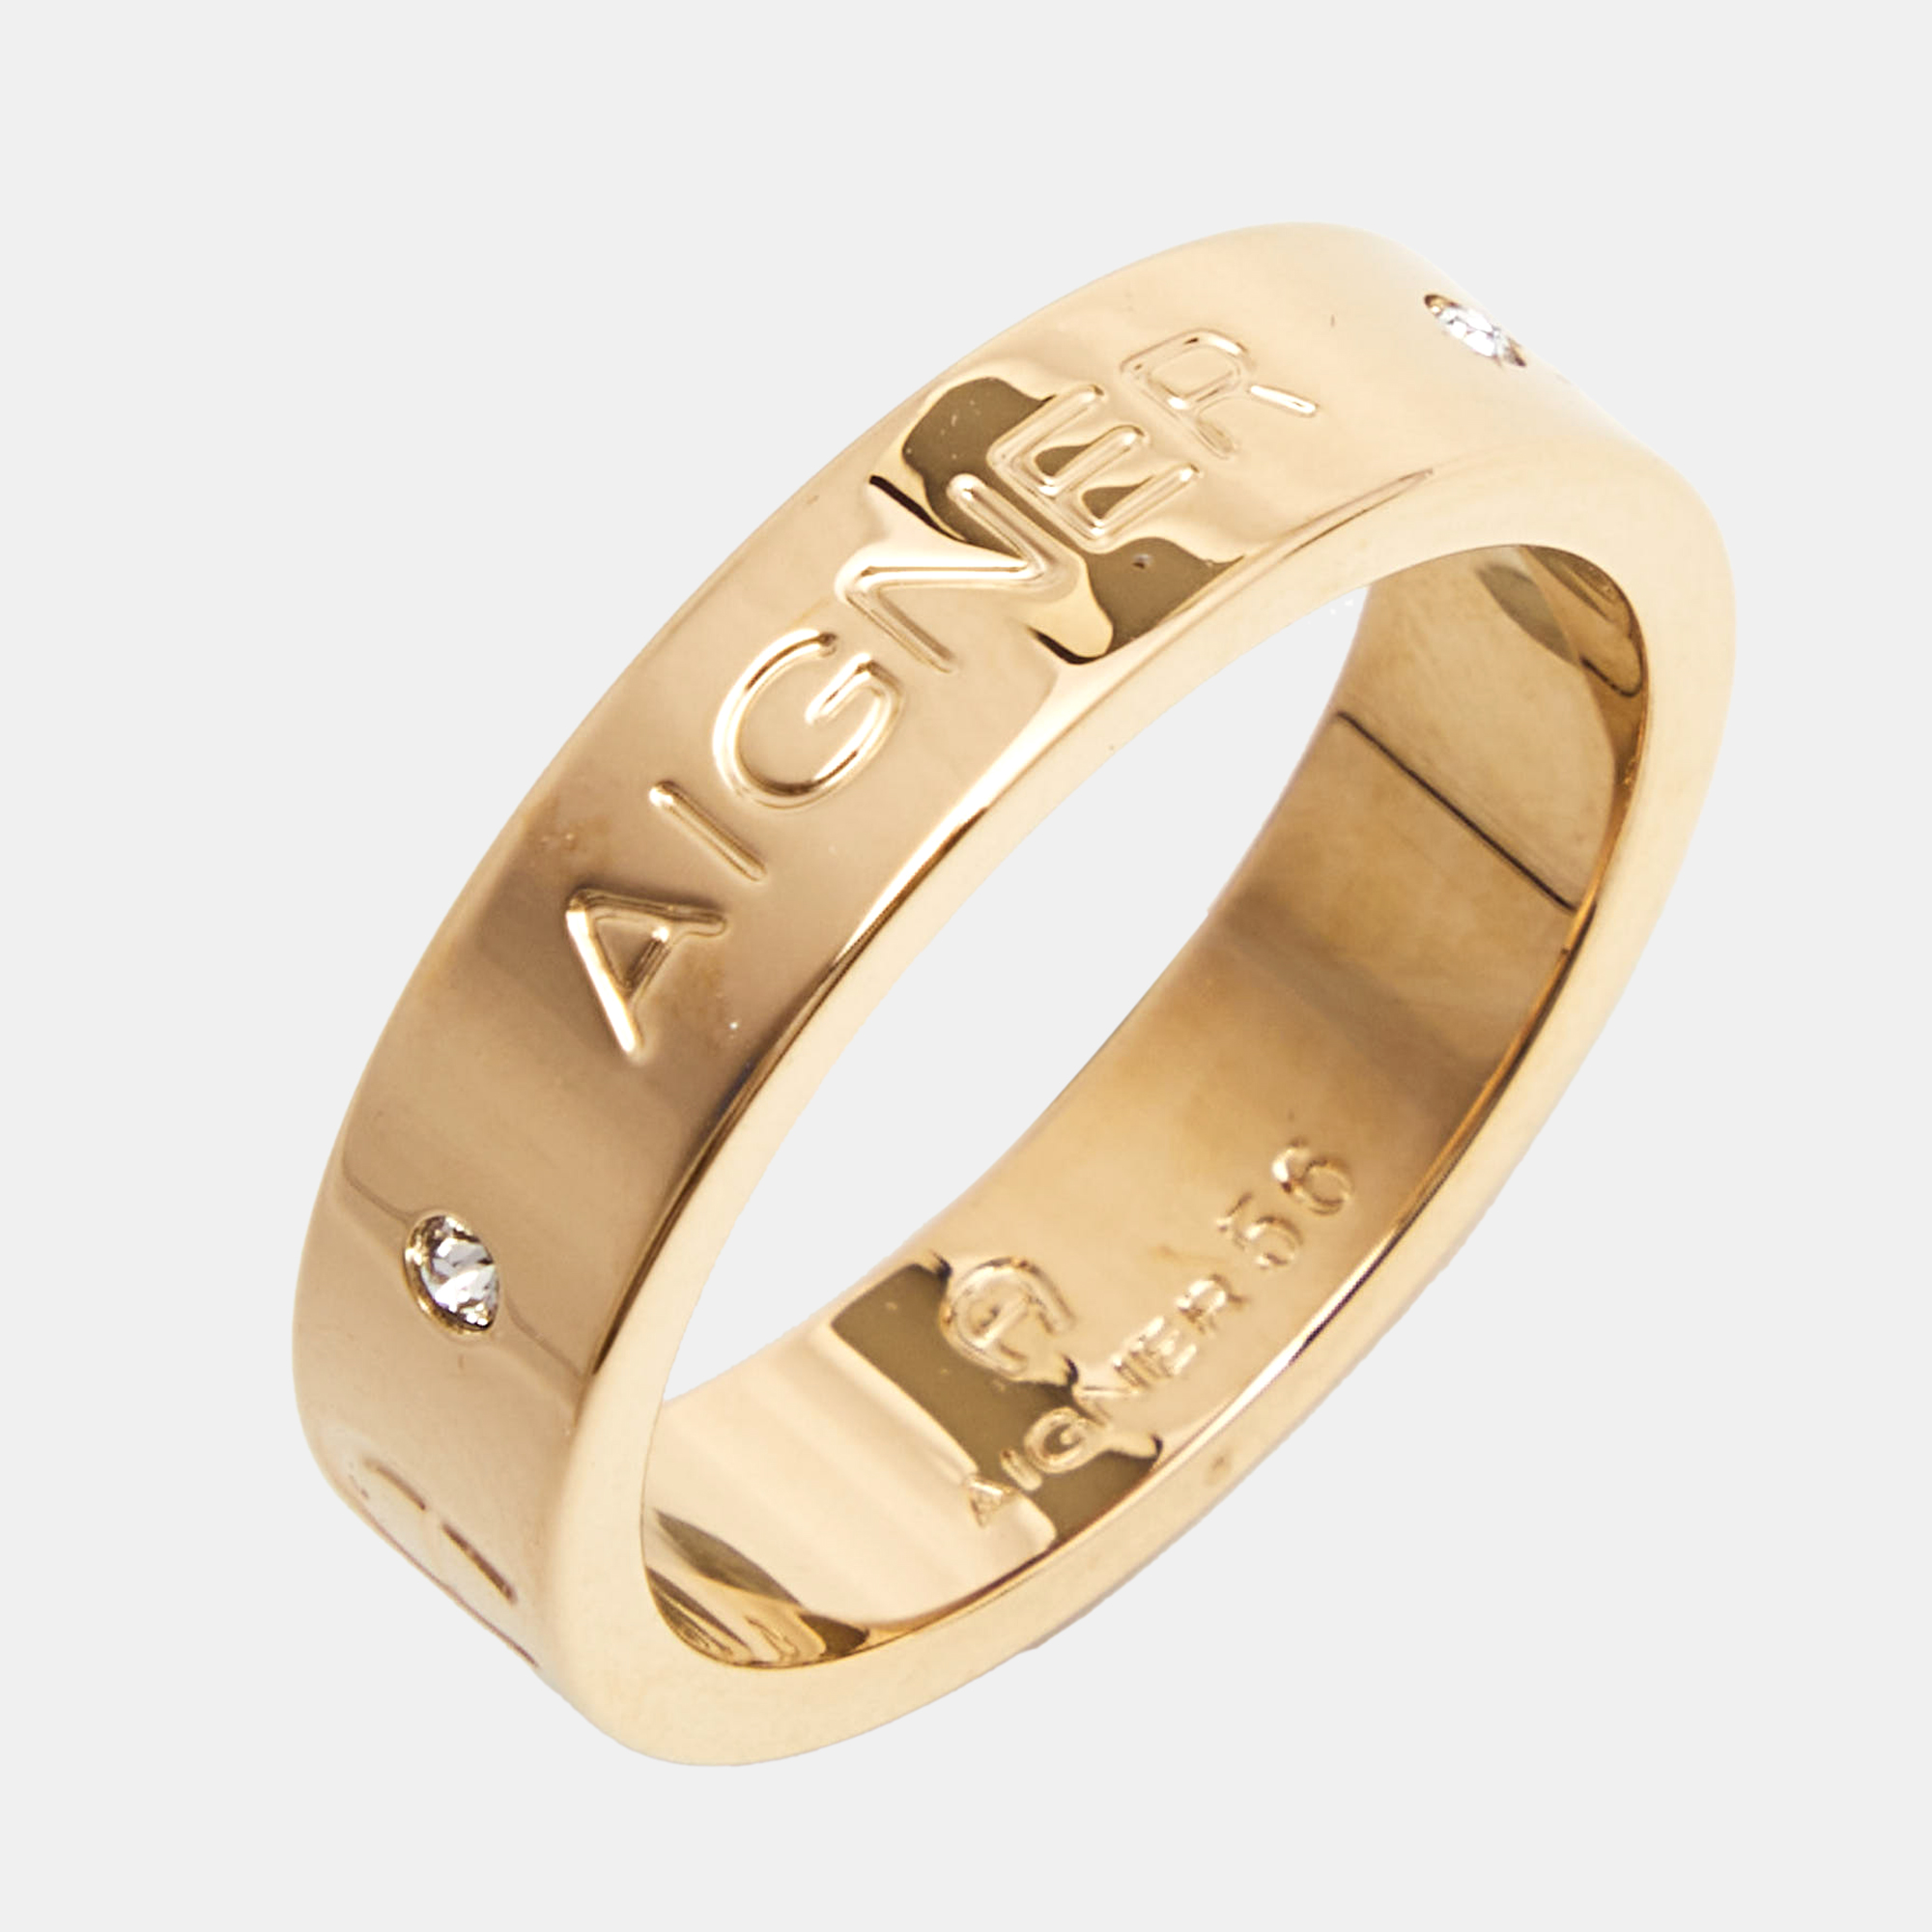 Aigner Crystals Gold Tone Ring Size 54